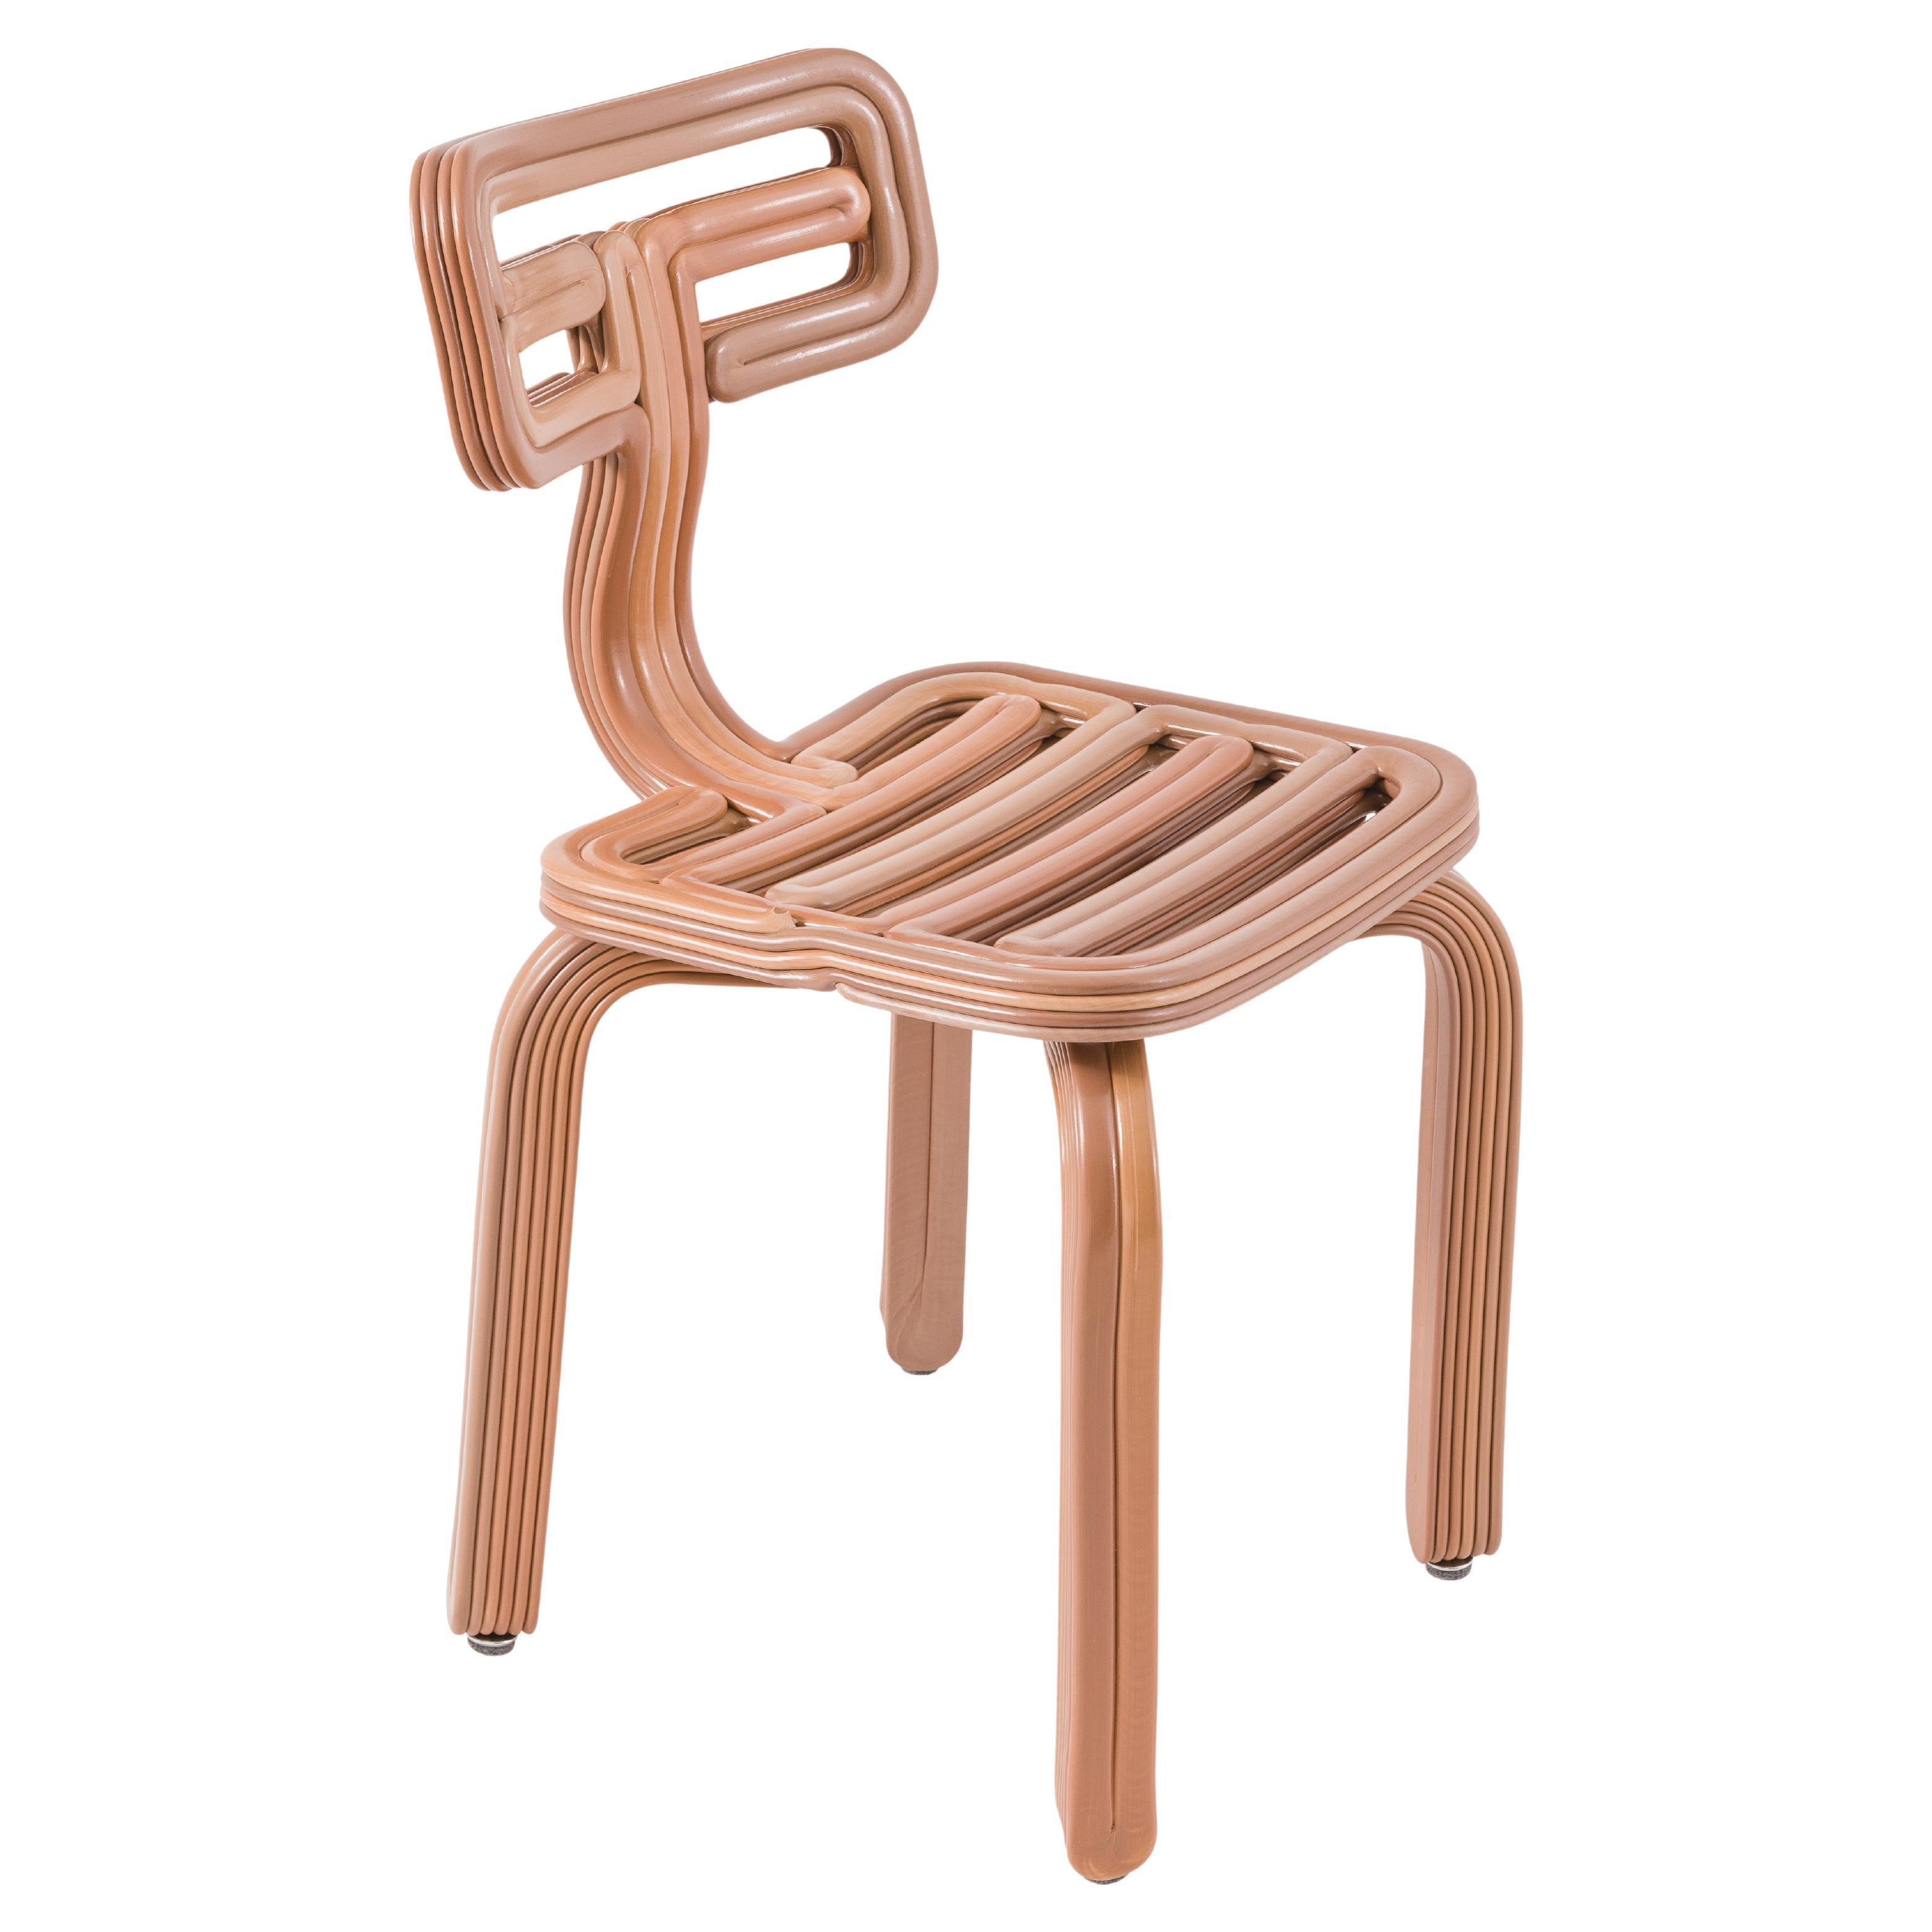 Chubby Chair in Toffee 3D Printed Recycled Plastic